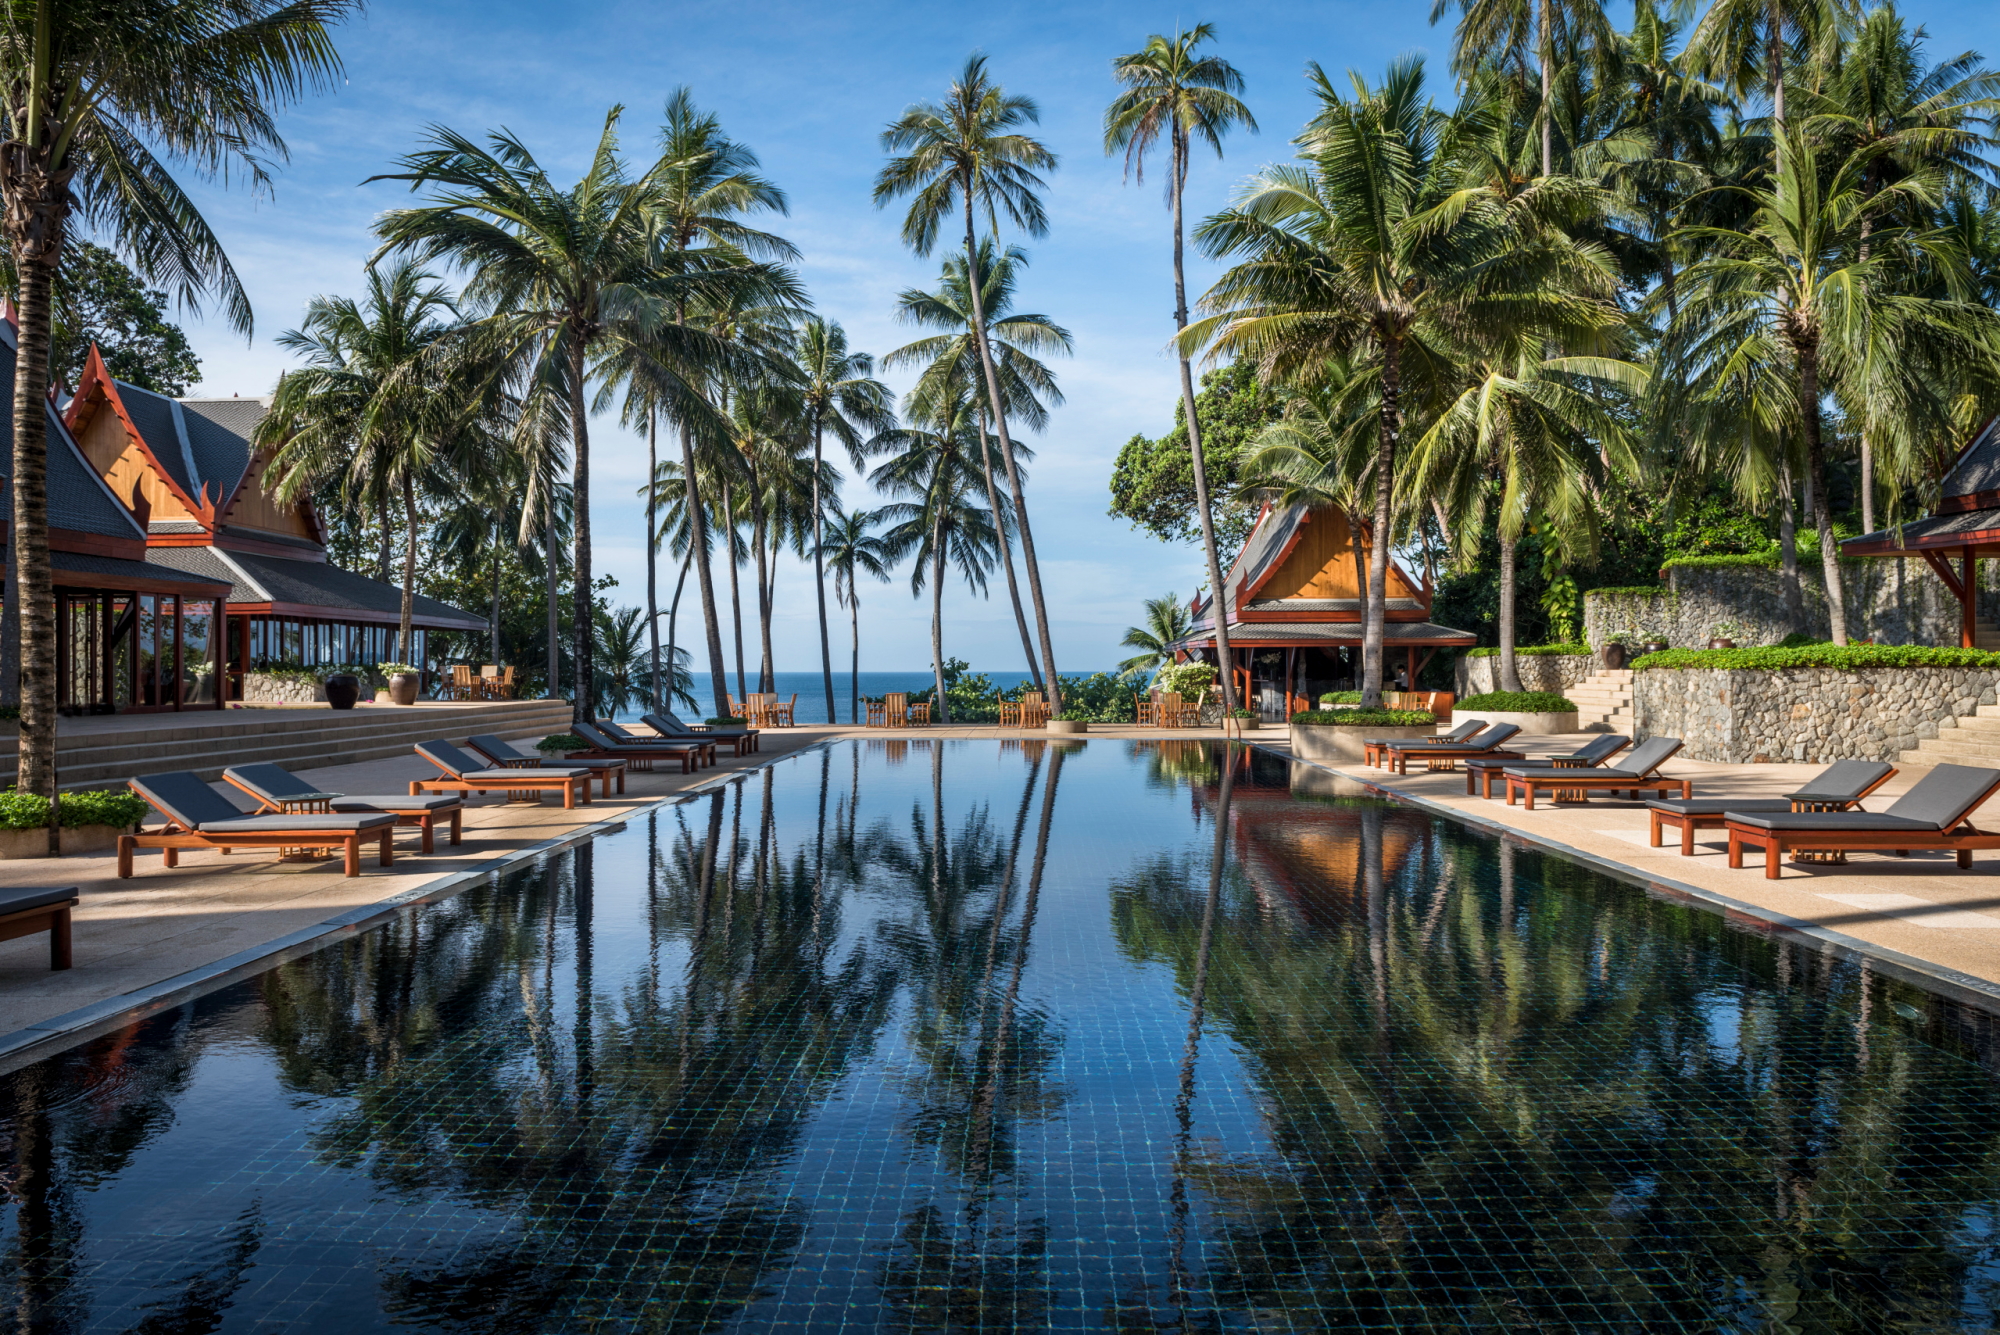 Swimming pool at one of Thailand's most famous luxury resorts, the Amanpuri in Phuket. Click to enlarge.